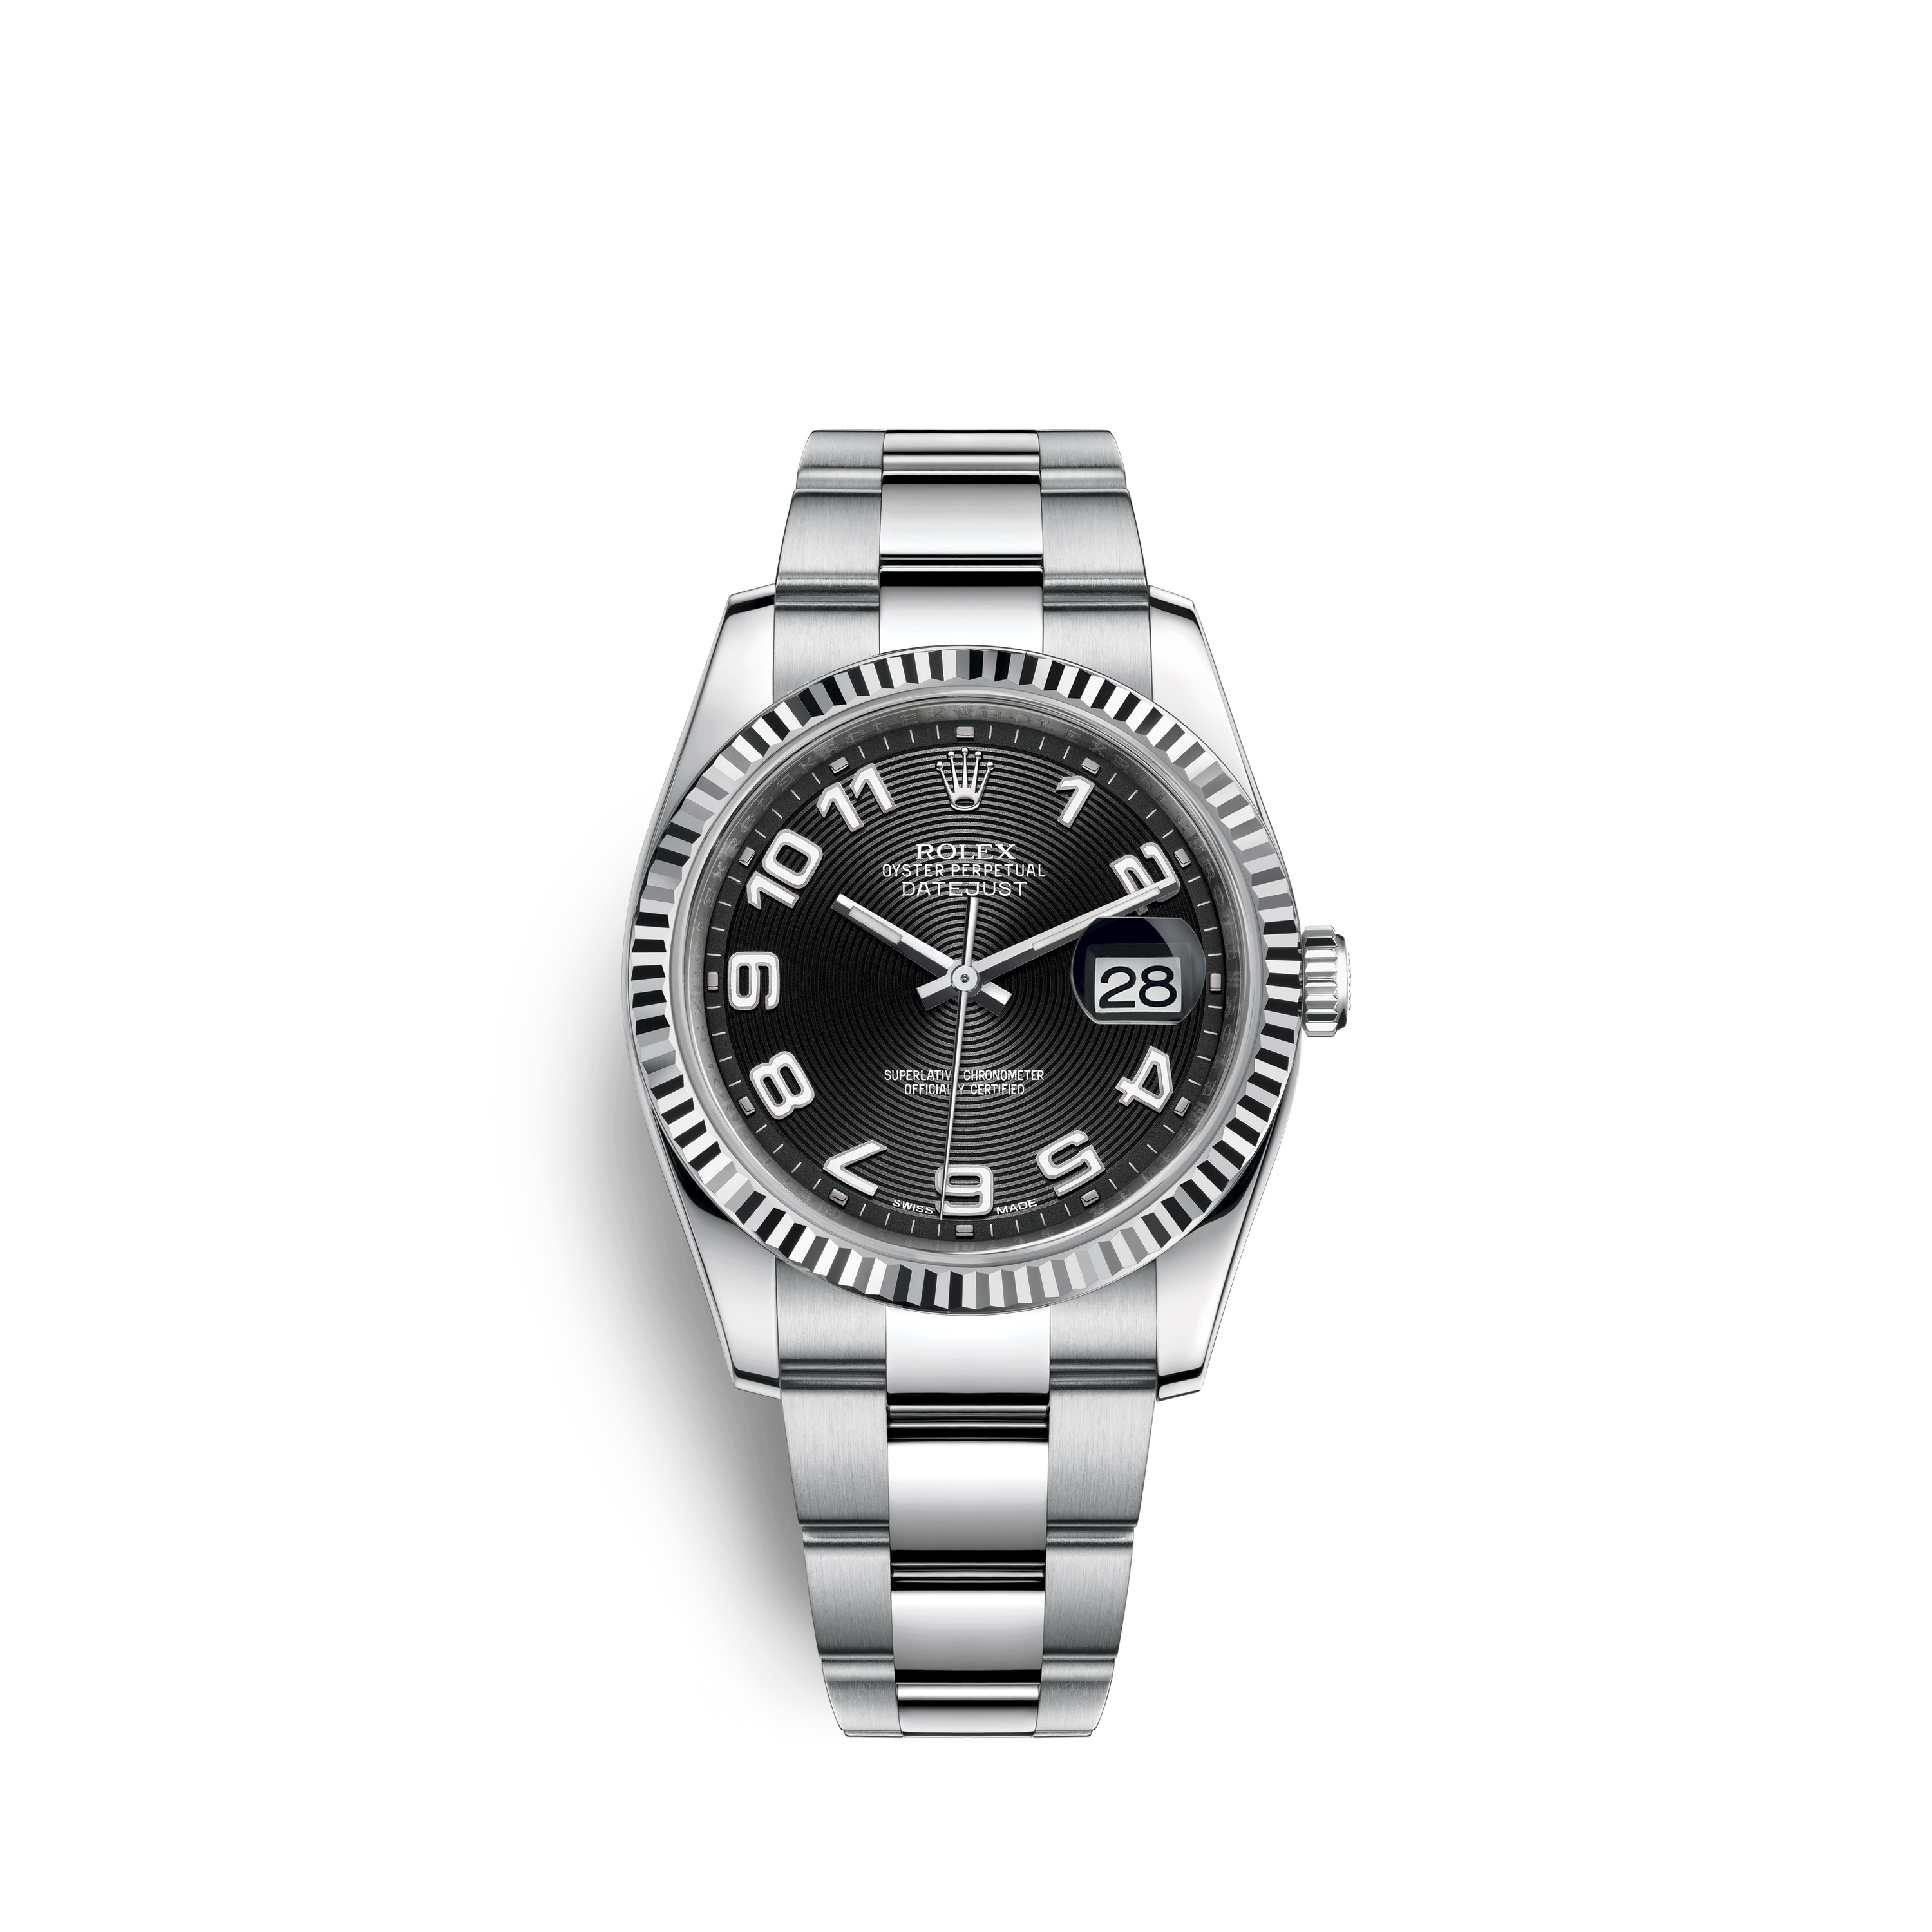 Datejust 36 116234 White Gold & Stainless Steel Watch (Black) - Click Image to Close